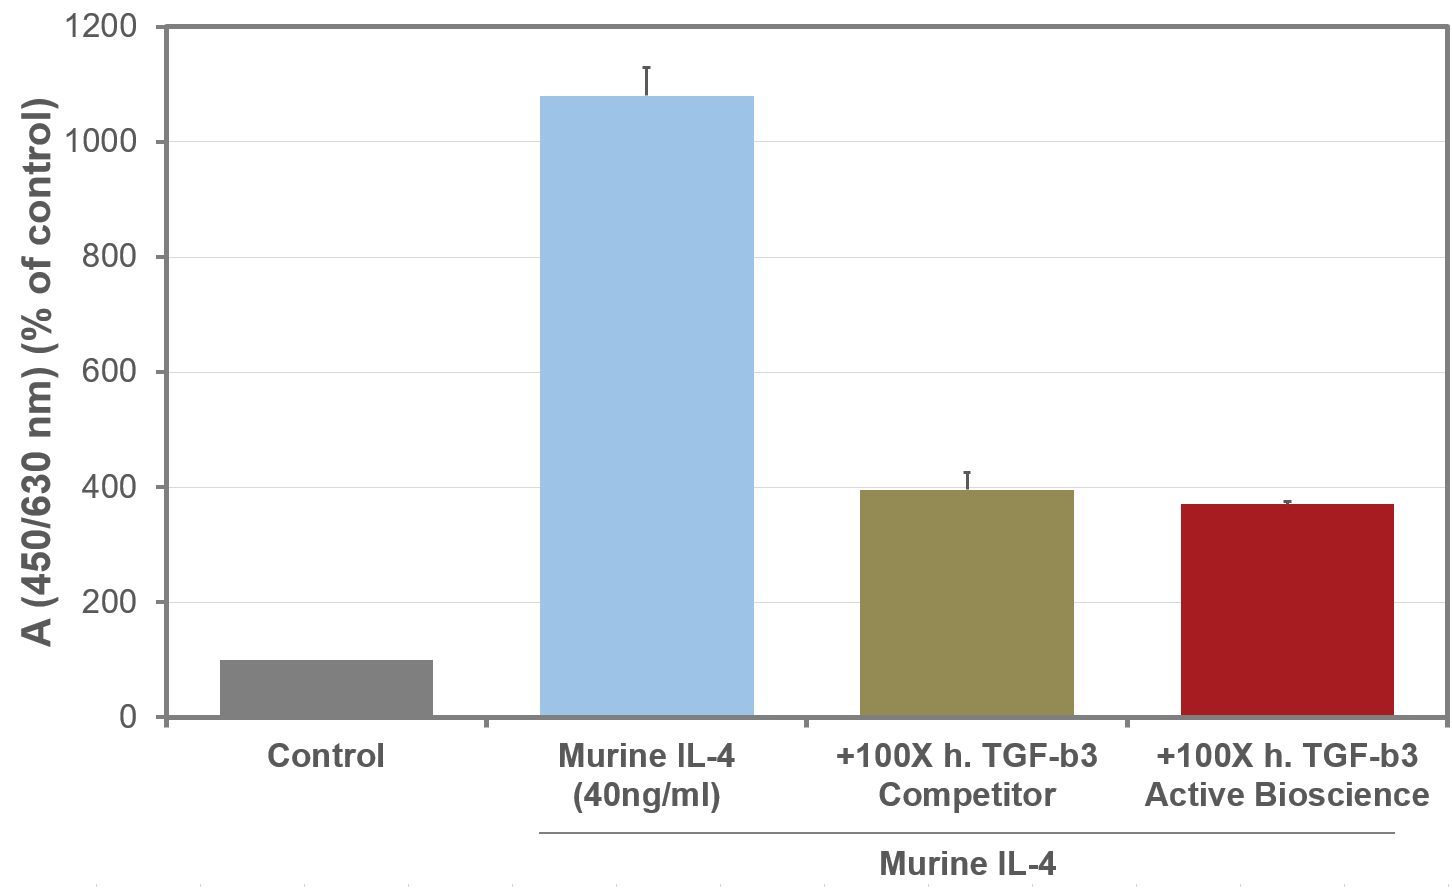 Fig. 1: Inhibition of mouse IL4-induced proliferation in HT2 cells by Human TGF-beta3. HT2 cells were stimulated with 40ng/ml mouse IL4 and inhibited with 4�g/ml Human TGF-beta3. Values are the means (�SD) of triplicate determinations and expressed as percentage of control.